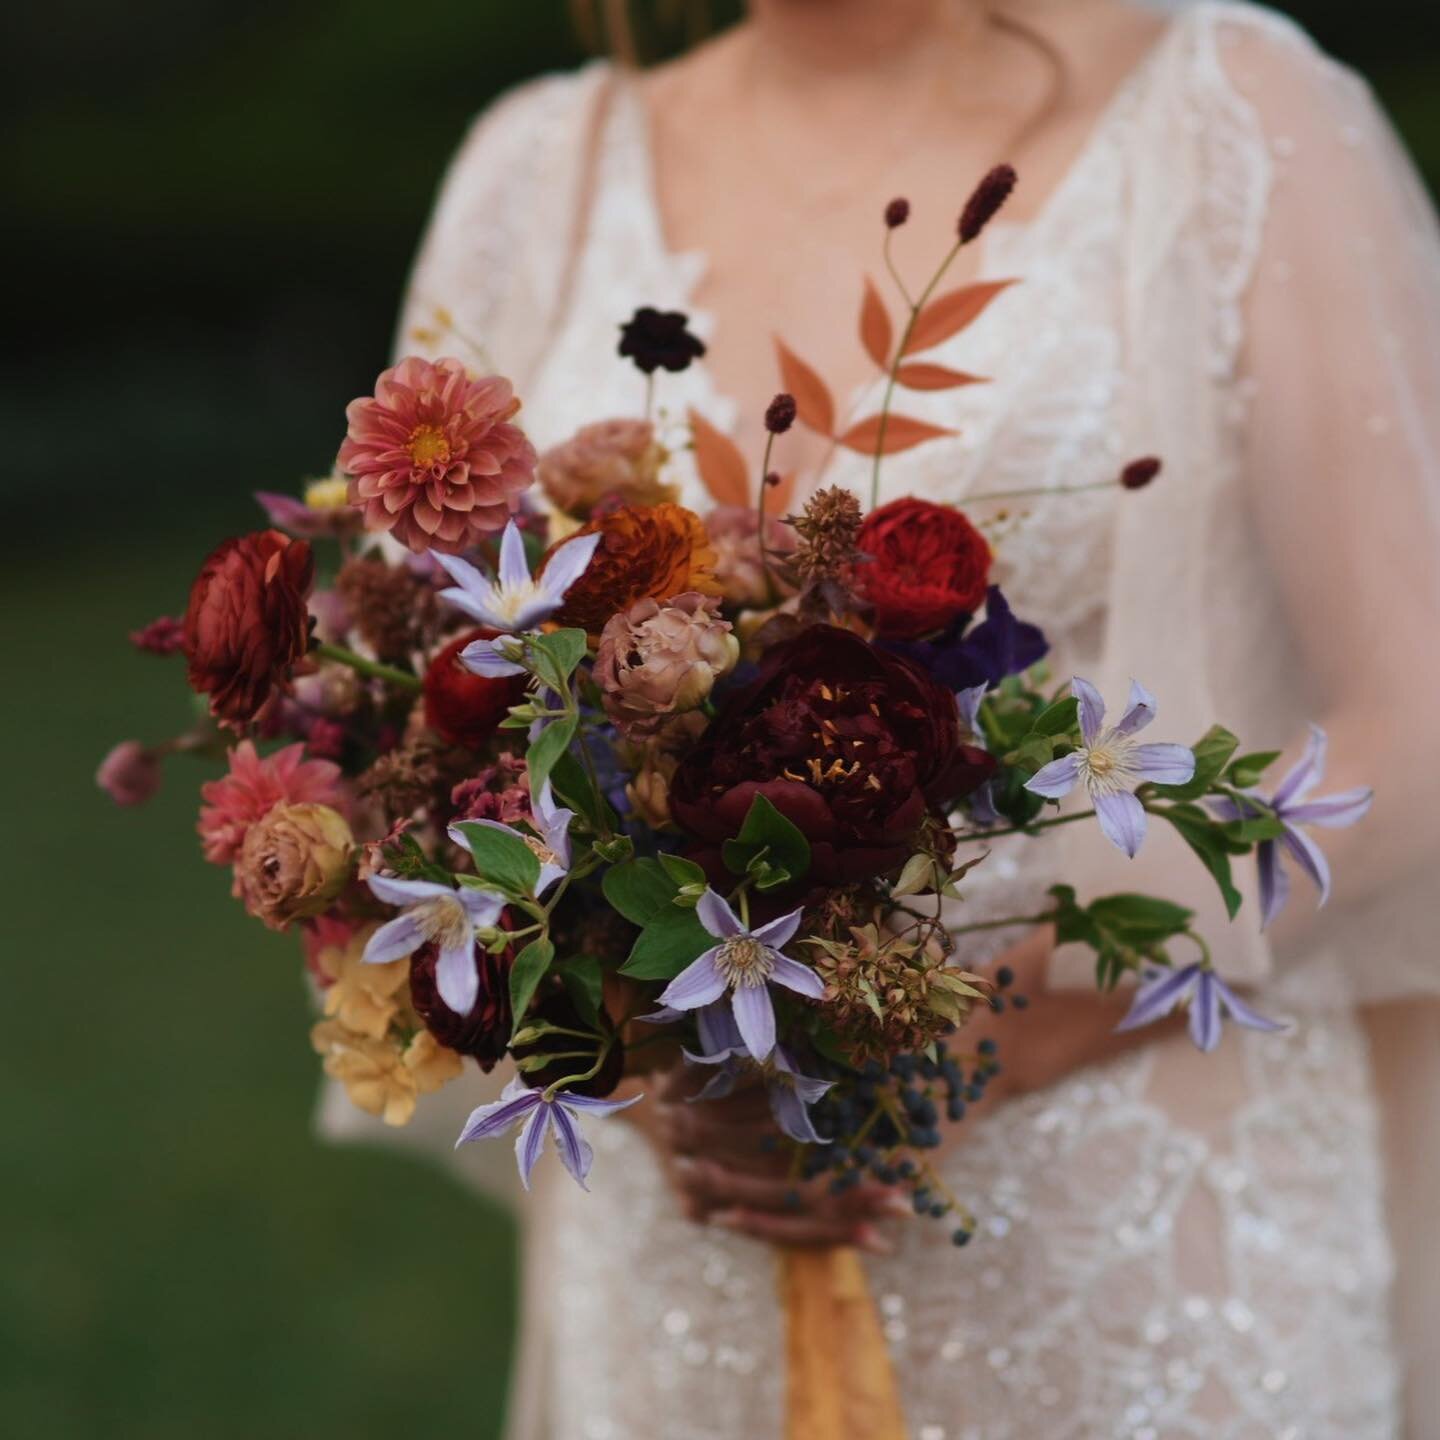 Lucky to have a photographer among the guests take &lsquo;every florists dream bouquet shots&rsquo; 📷
Thank you @leyism for bringing your camera, taking these and surprising me in my inbox 😊😌

Bride @mtremy 
Event planning @curatedbygw 
Venue @par